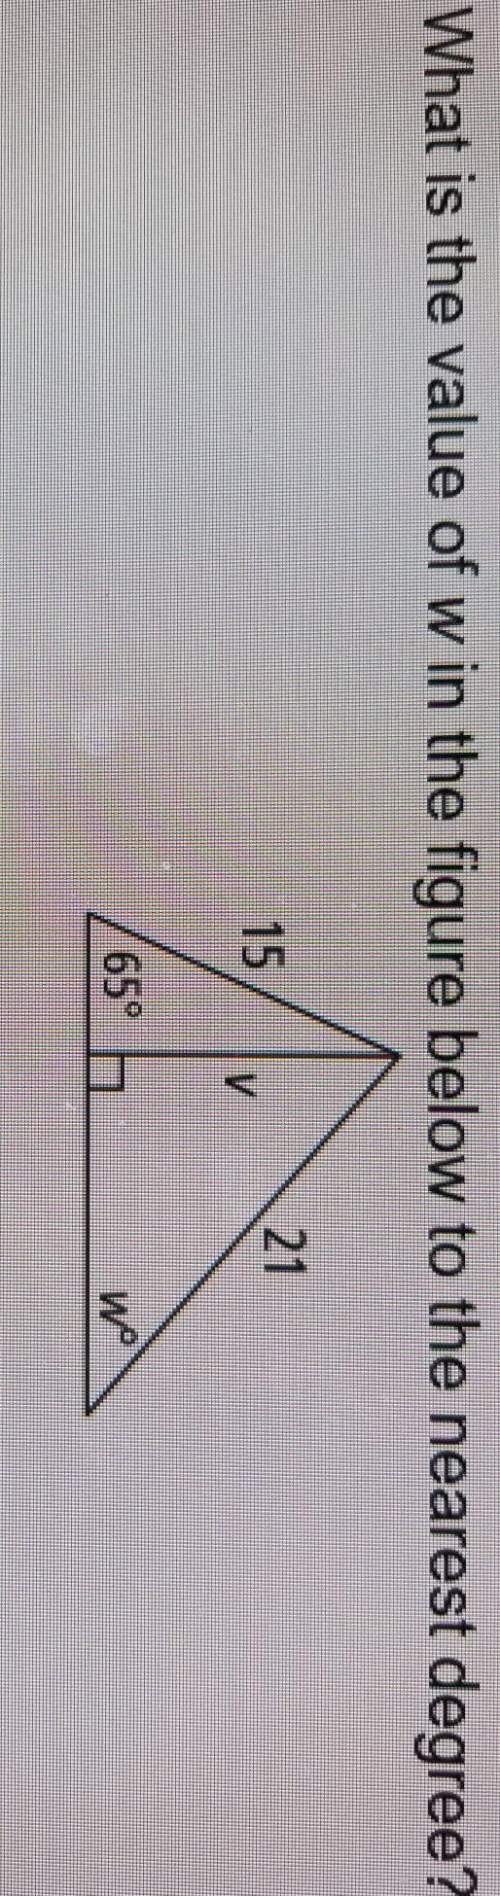 What is the value of w in the figure below to the nearest degree? a. 25b. 35c. 40&lt;